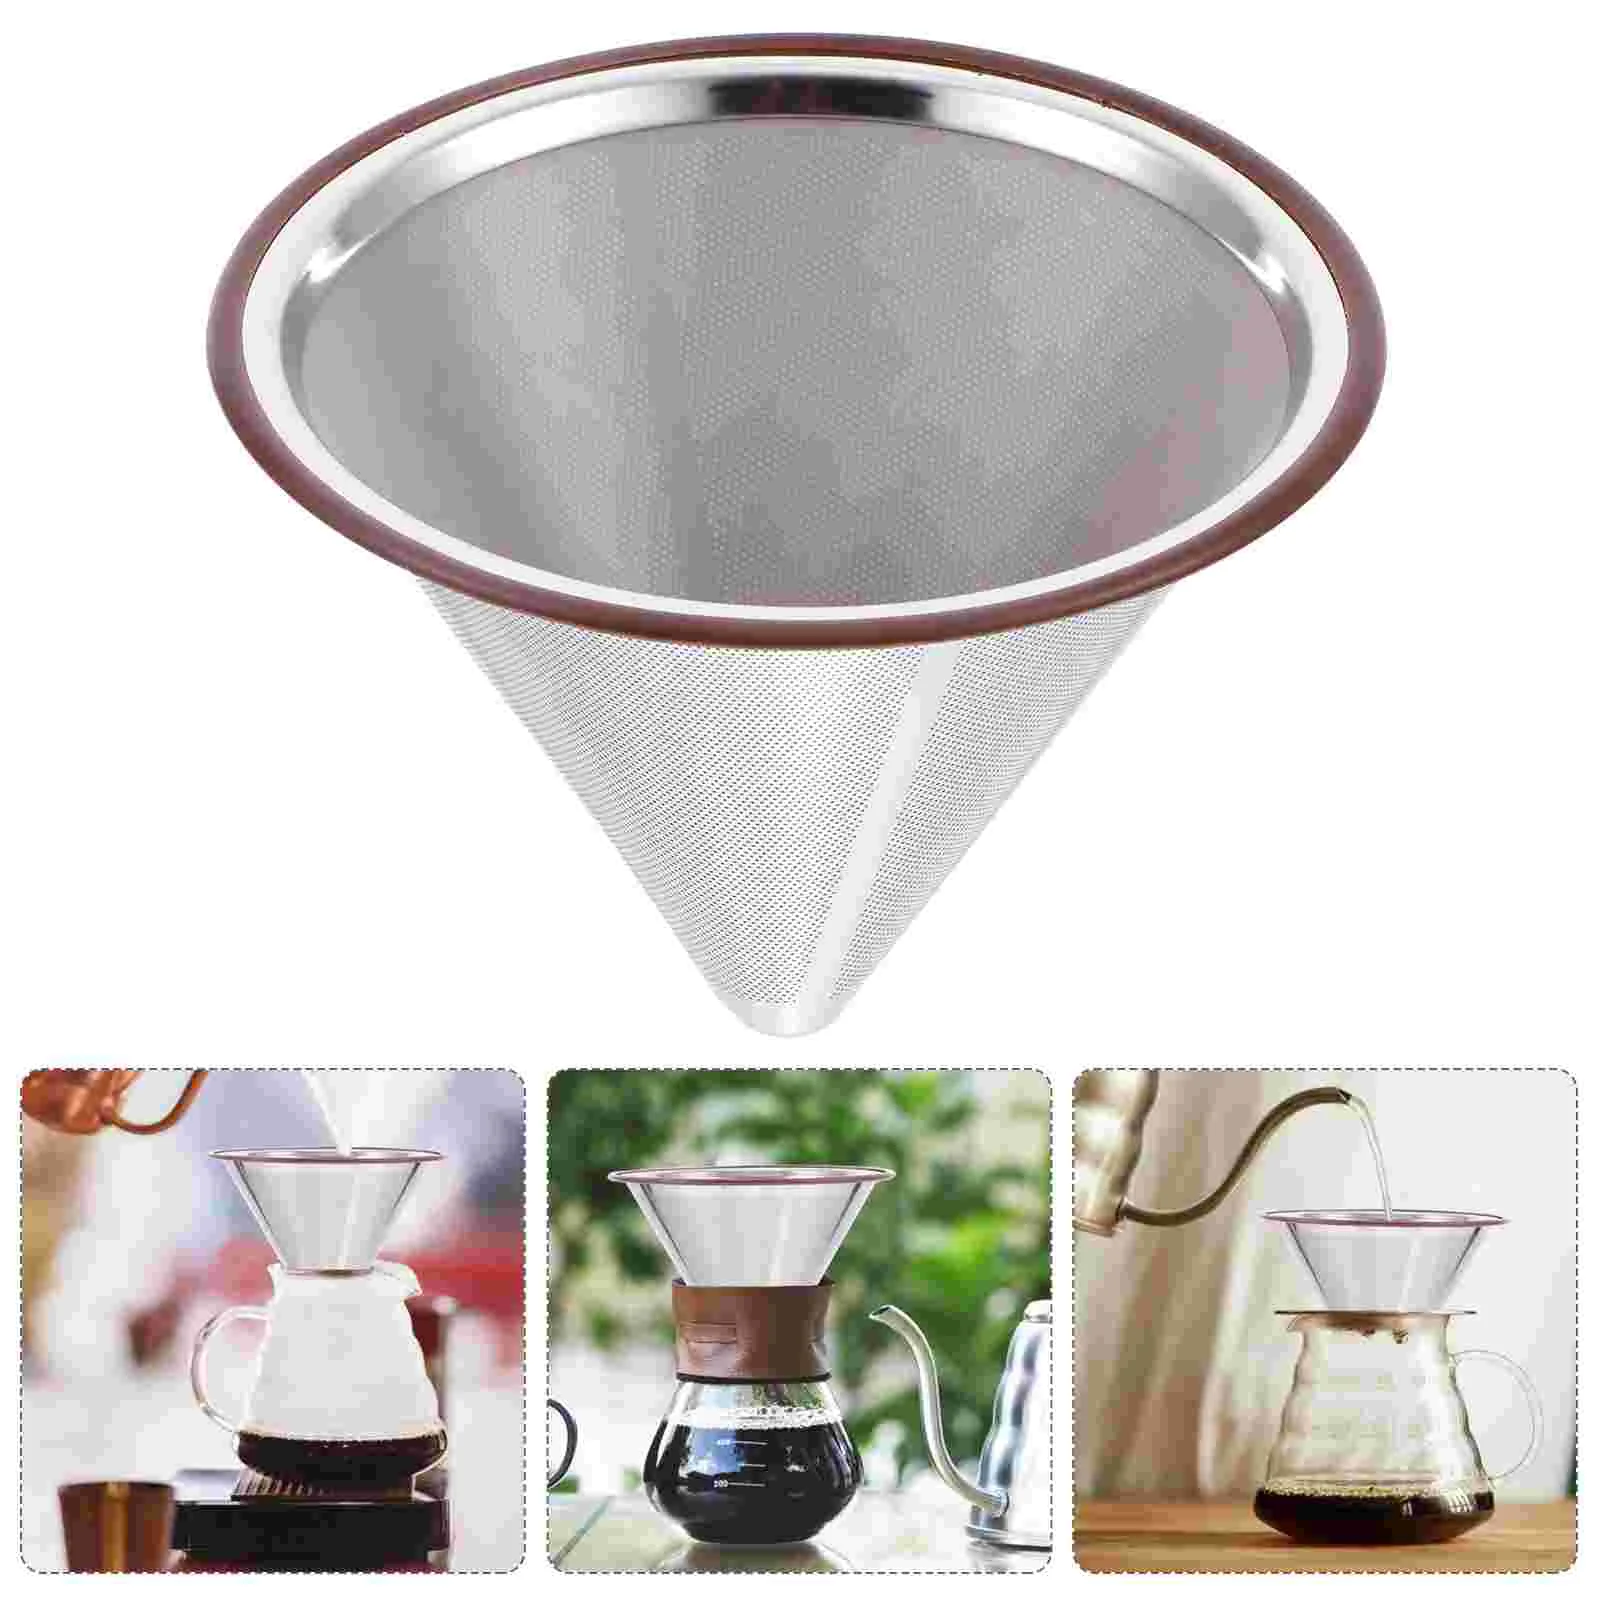 

Coffee Pour Over Filter Dripper Drip Maker Reusable Filters Cup Cone Tea Strainer Stand Loose Stainless Brew Manual Steel Bags